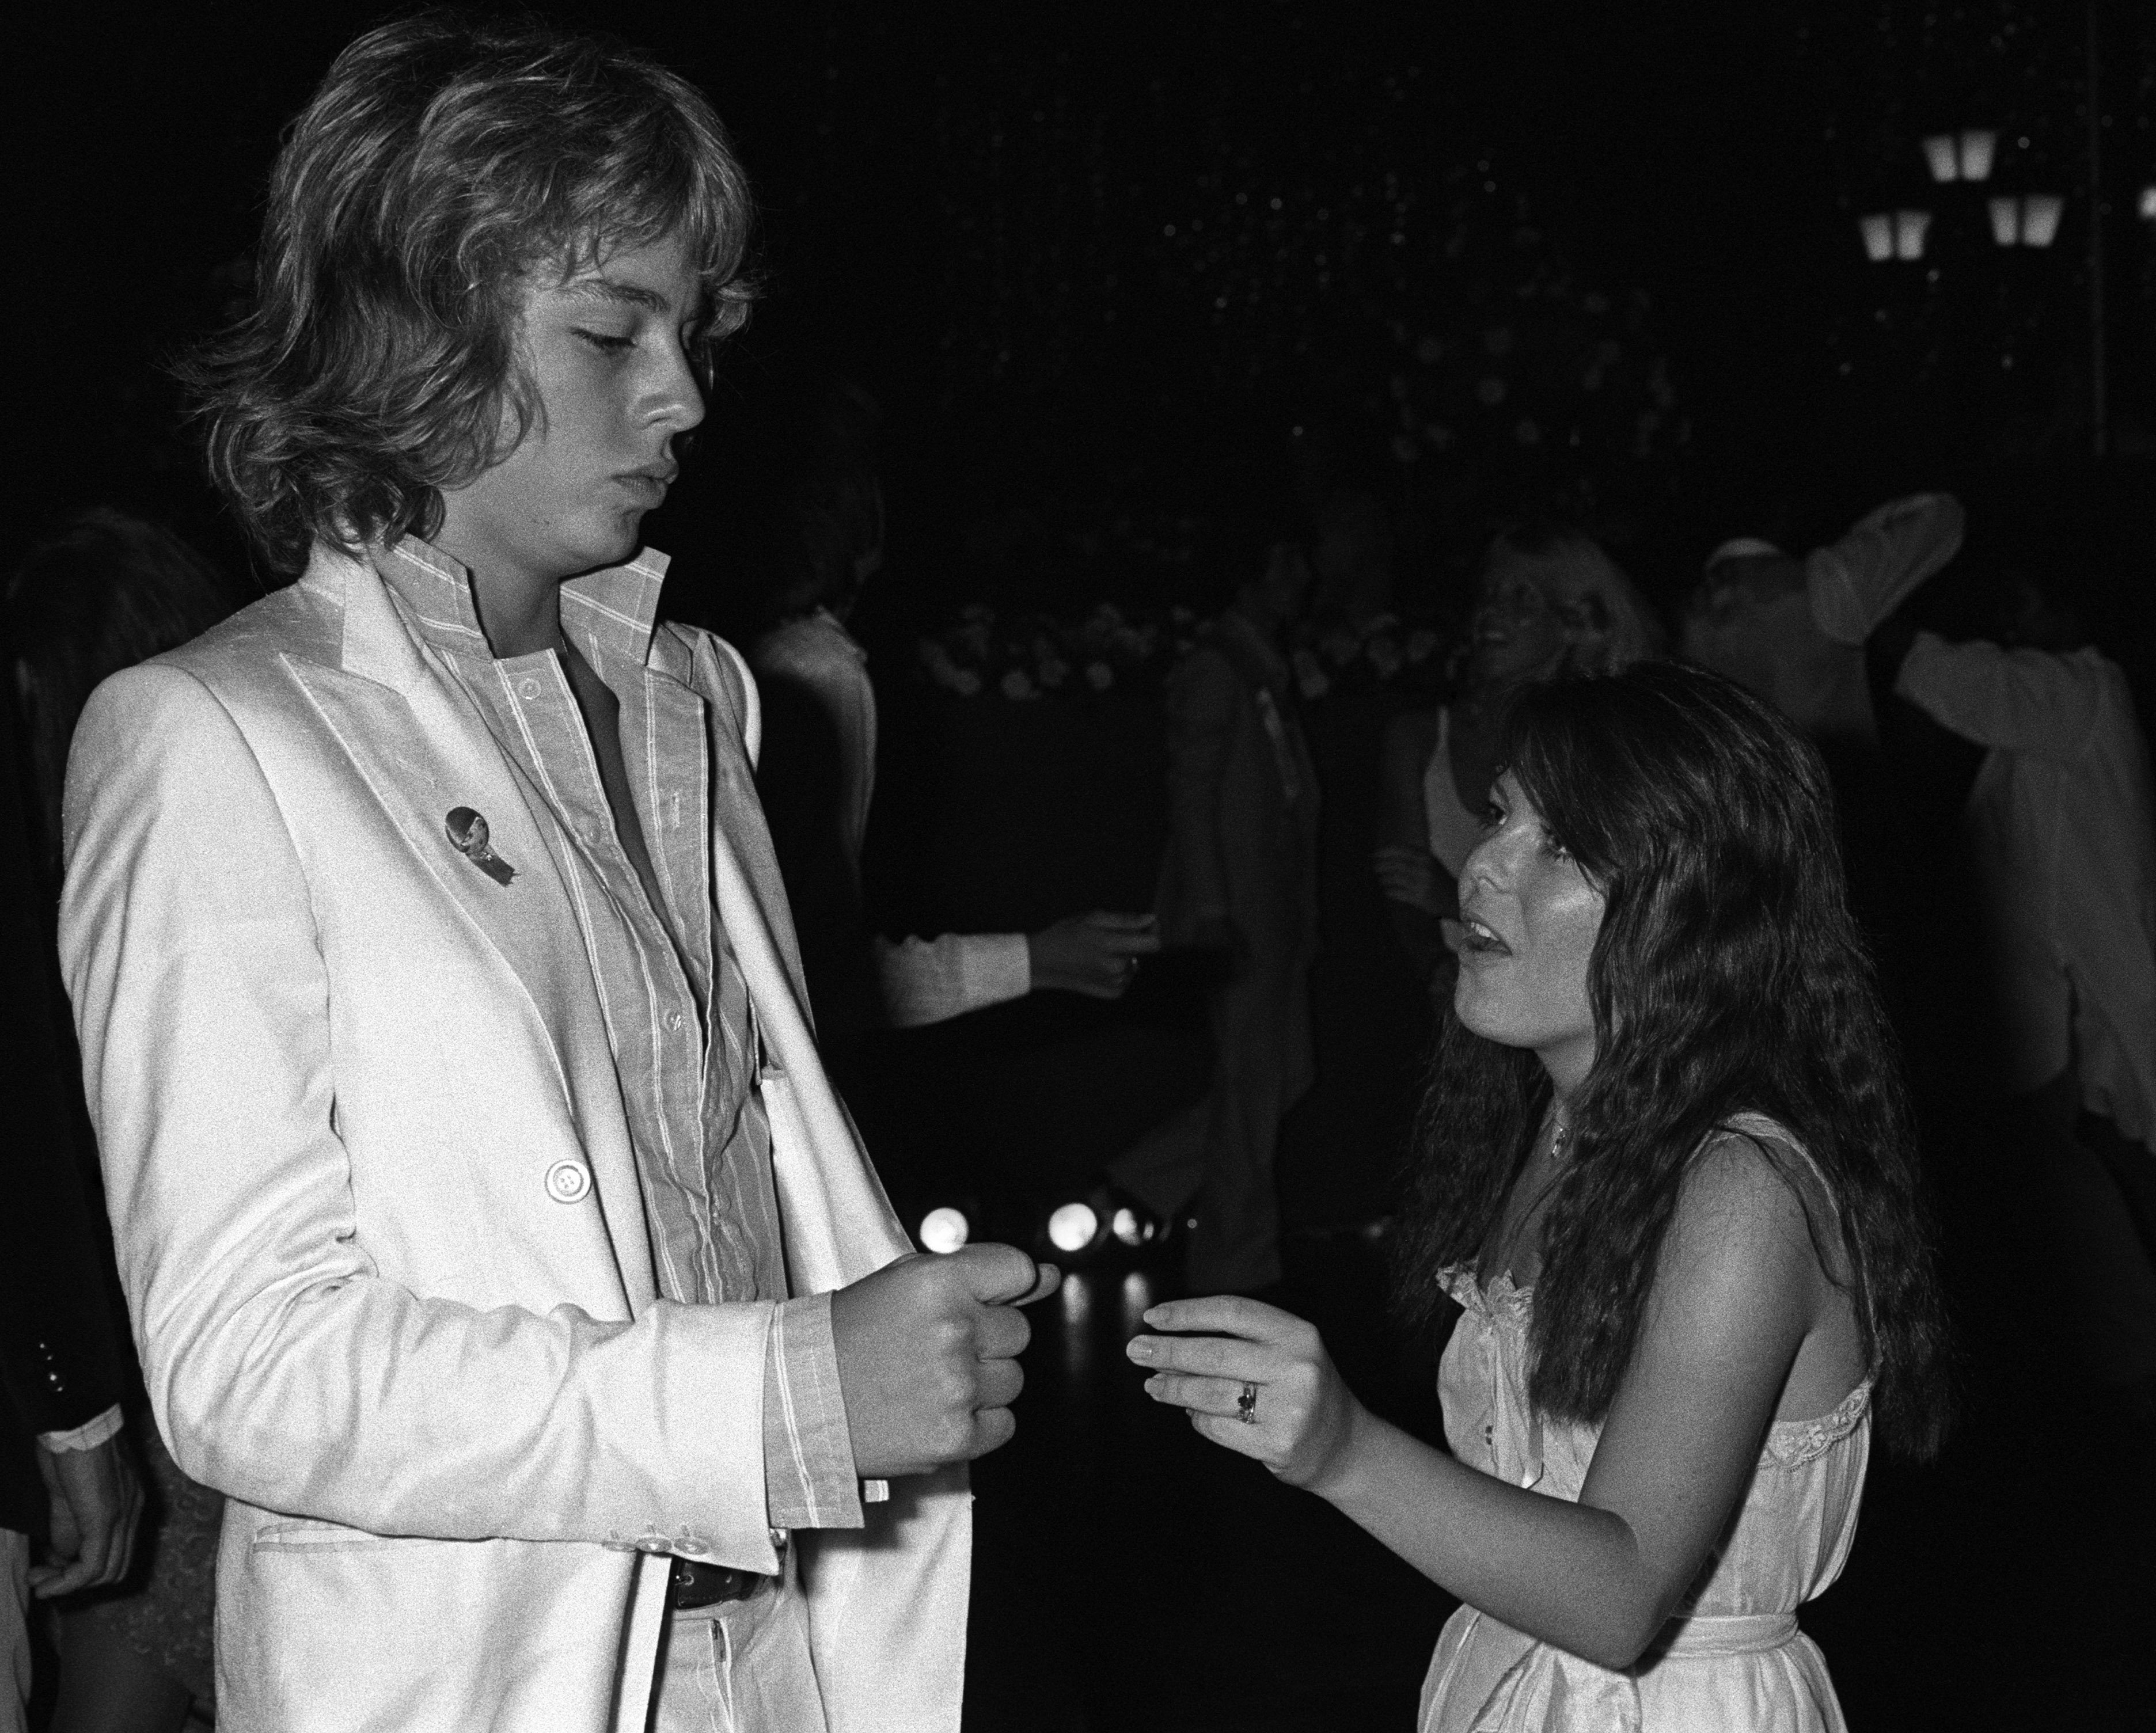 Leif Garrett and his sister Dawn Lyn dance at a party at the Playboy Mansion in Los Angeles, California in 1970 | Source: Getty Images